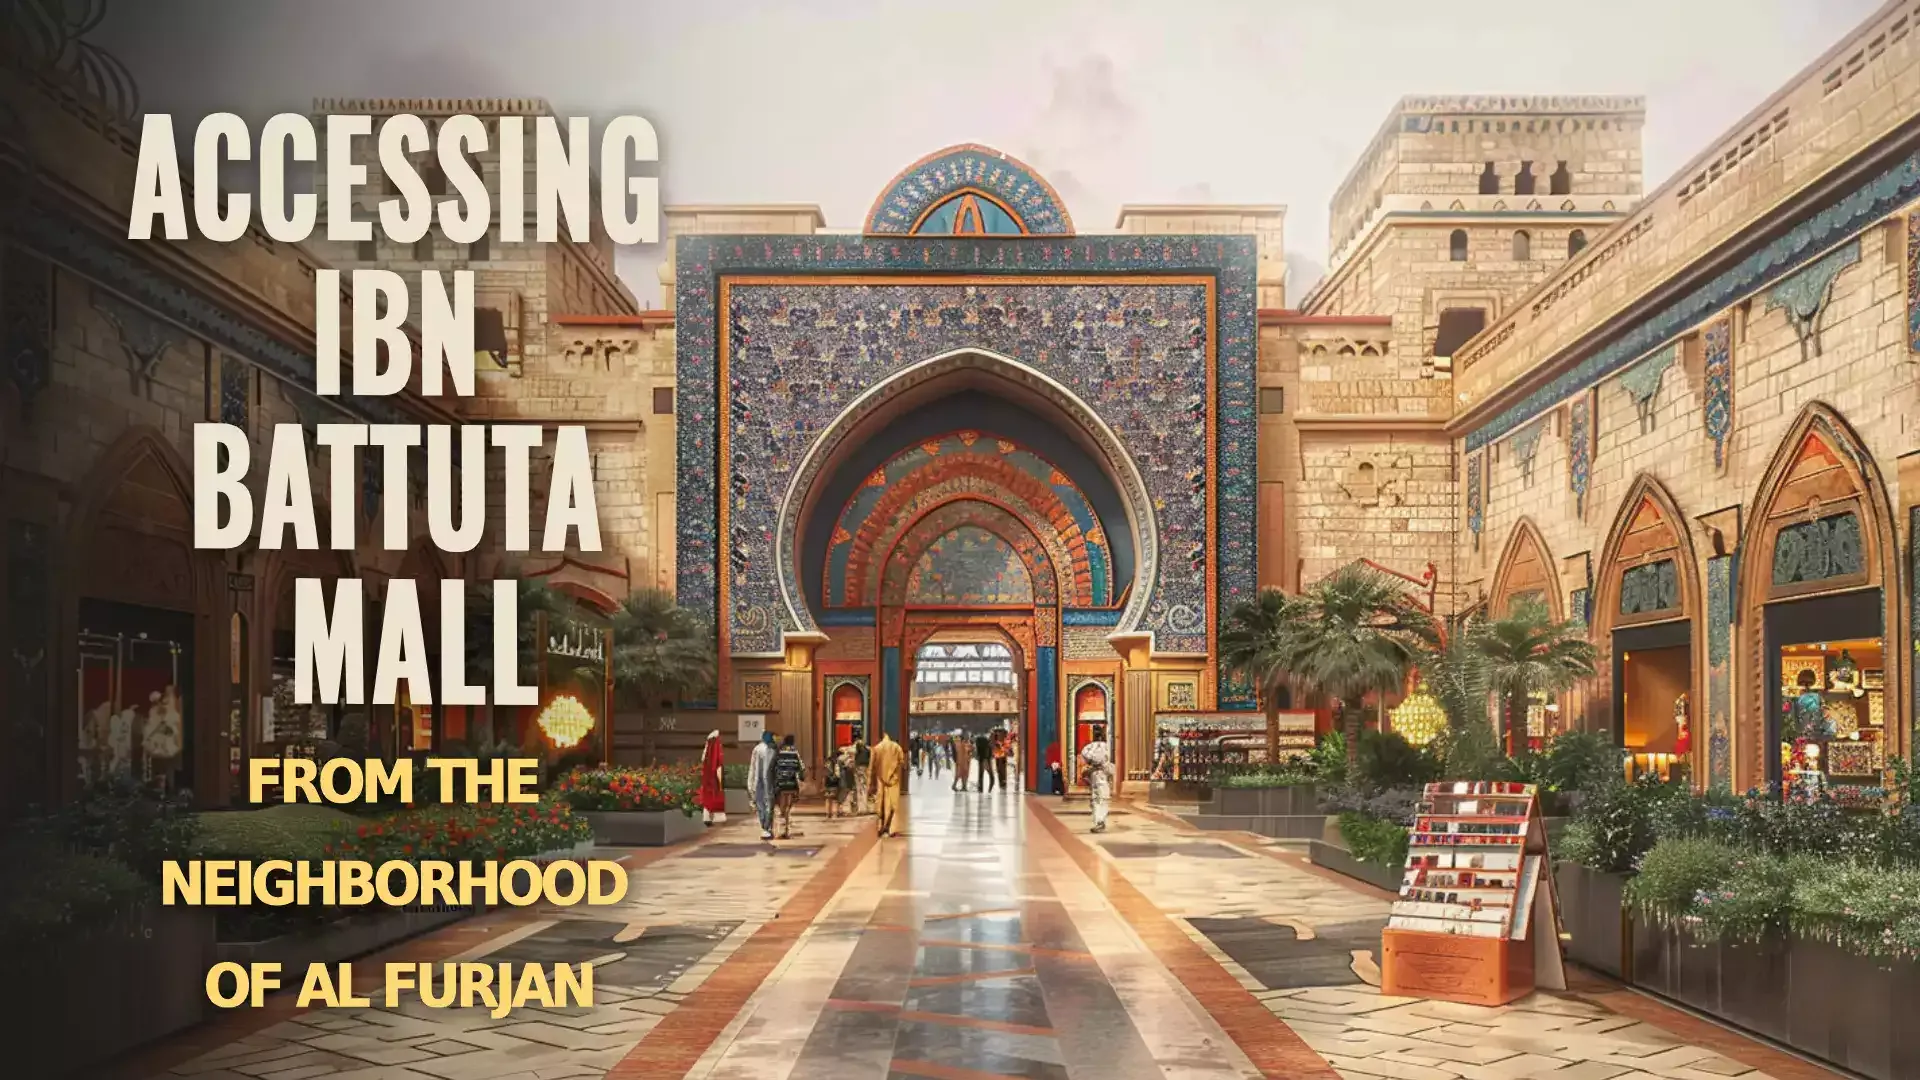 Al Furjan to Ibn Battuta Mall Access - Easy Transit Route for Retail Therapy and Entertainment